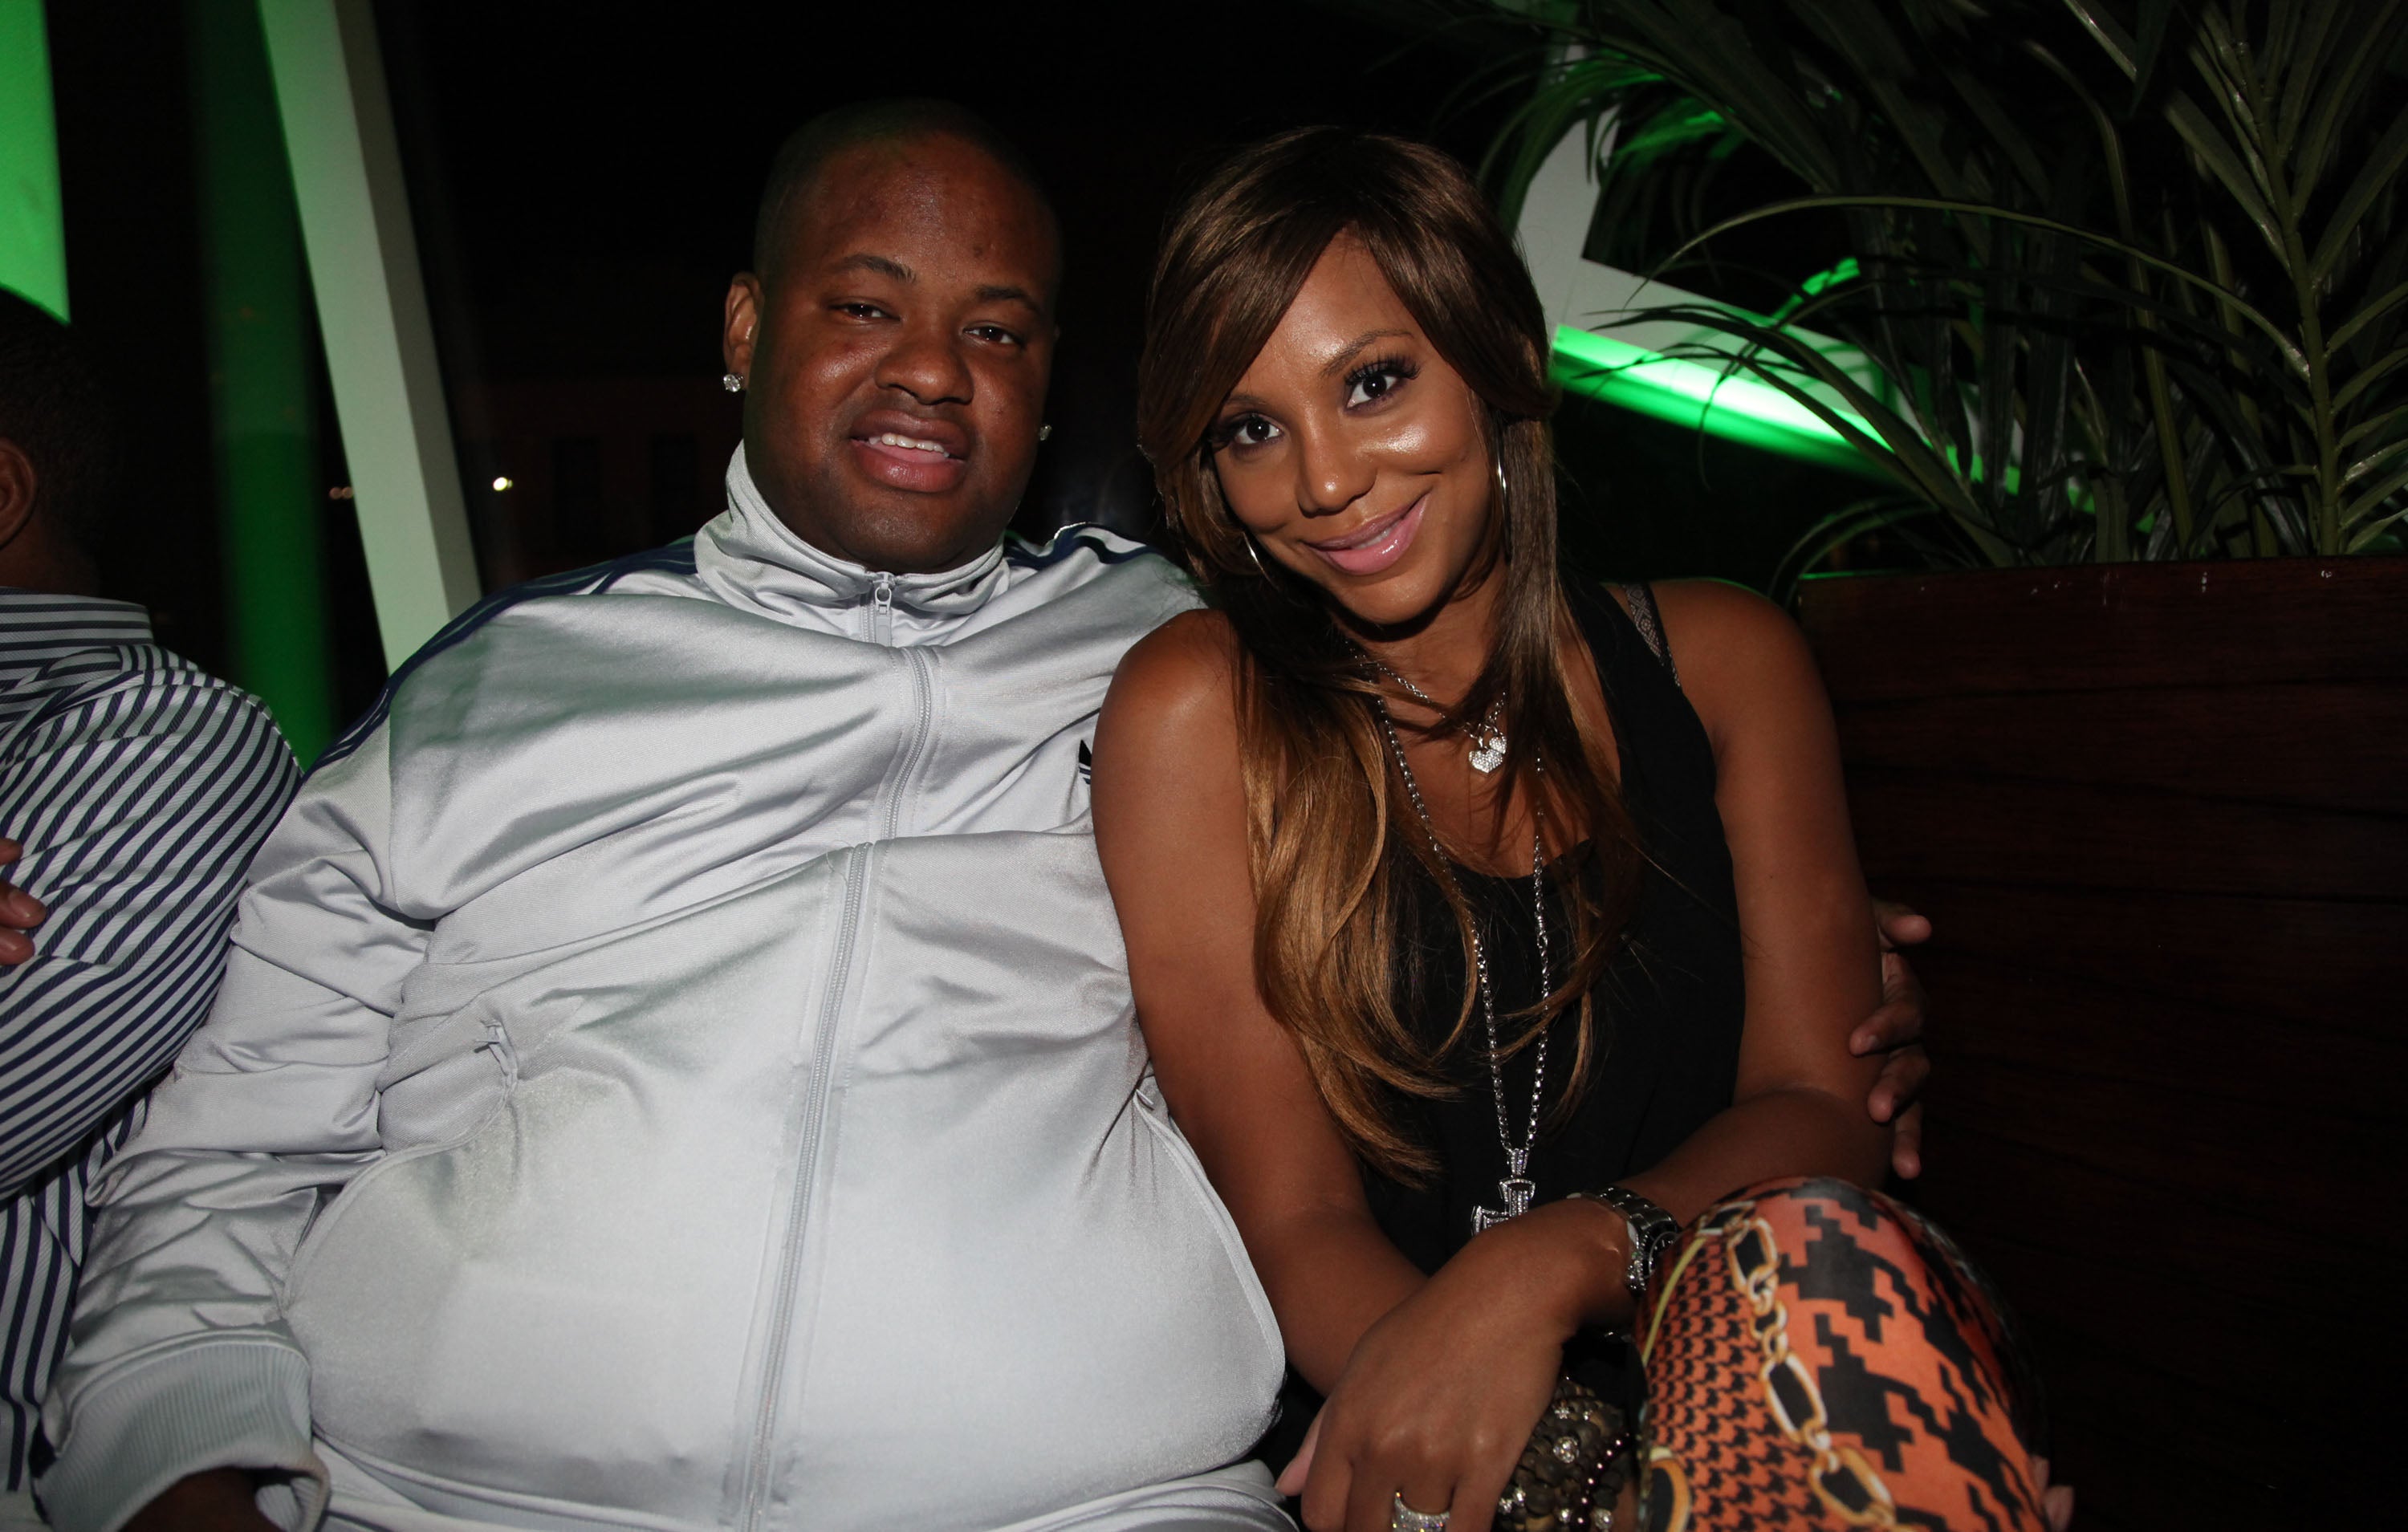 A Timeline Of Tamar Braxton And Vincent Herbert's Marriage: The Good, The Bad And The End
